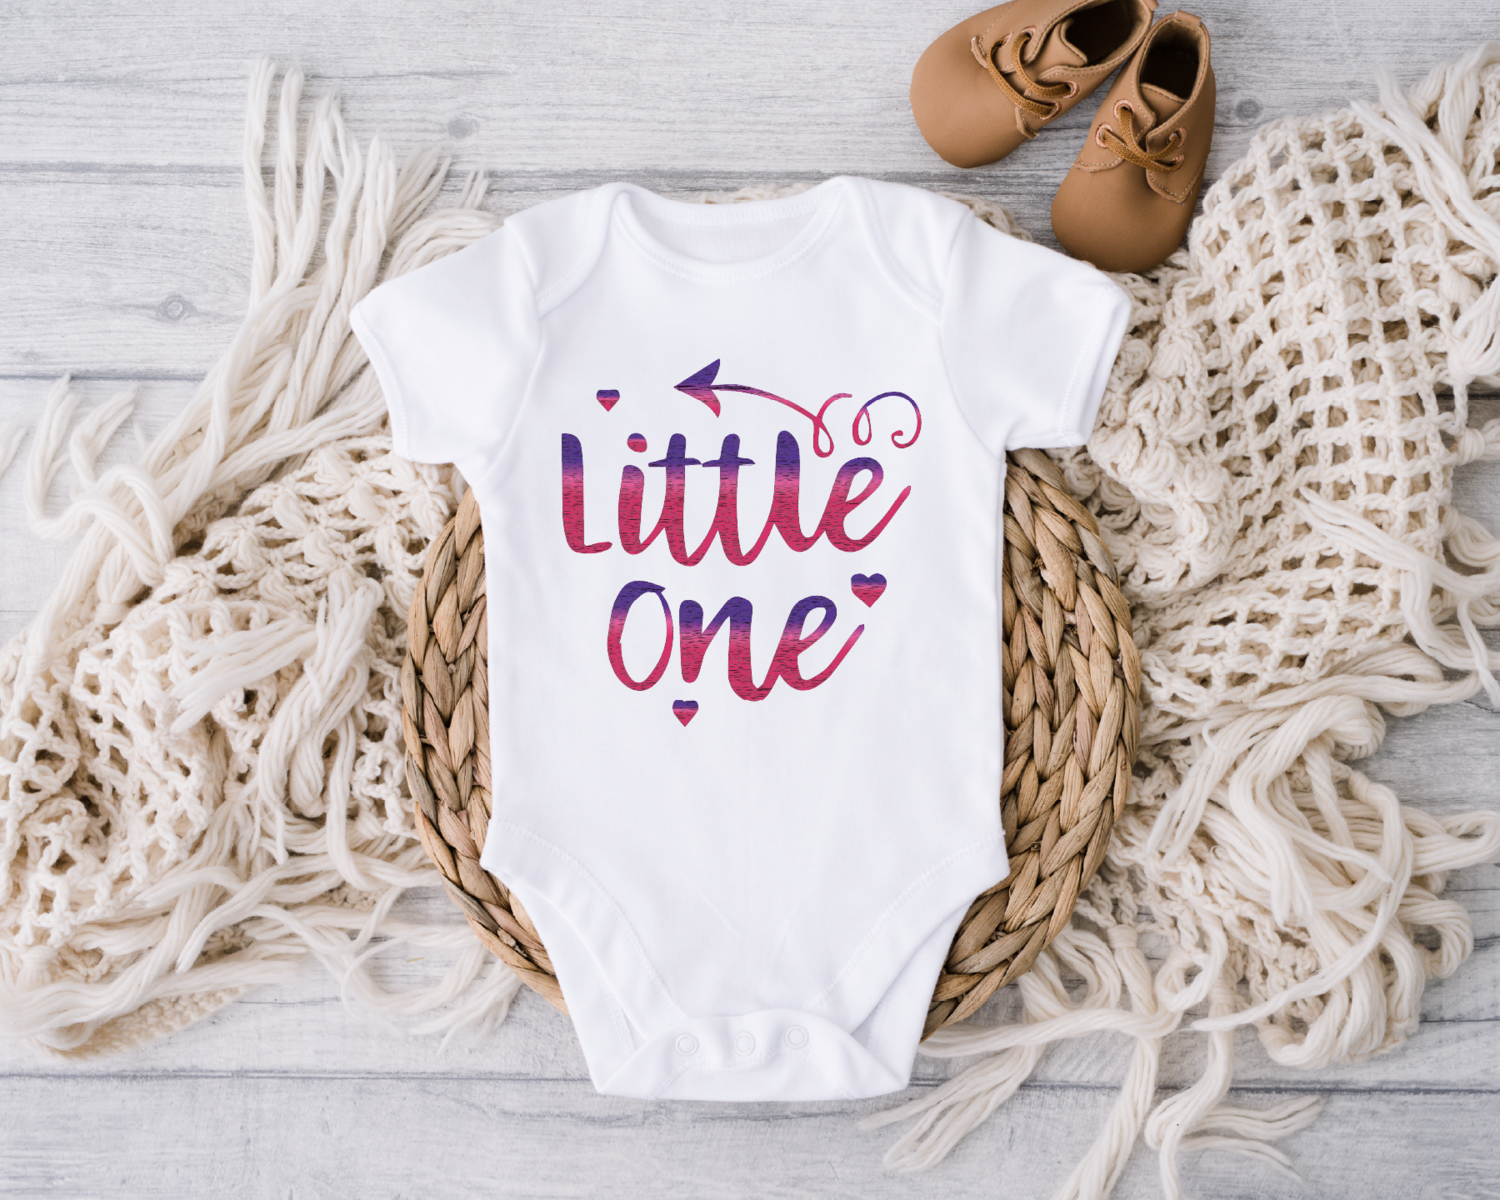 Little One Baby Onesie, Cute Baby Clothes